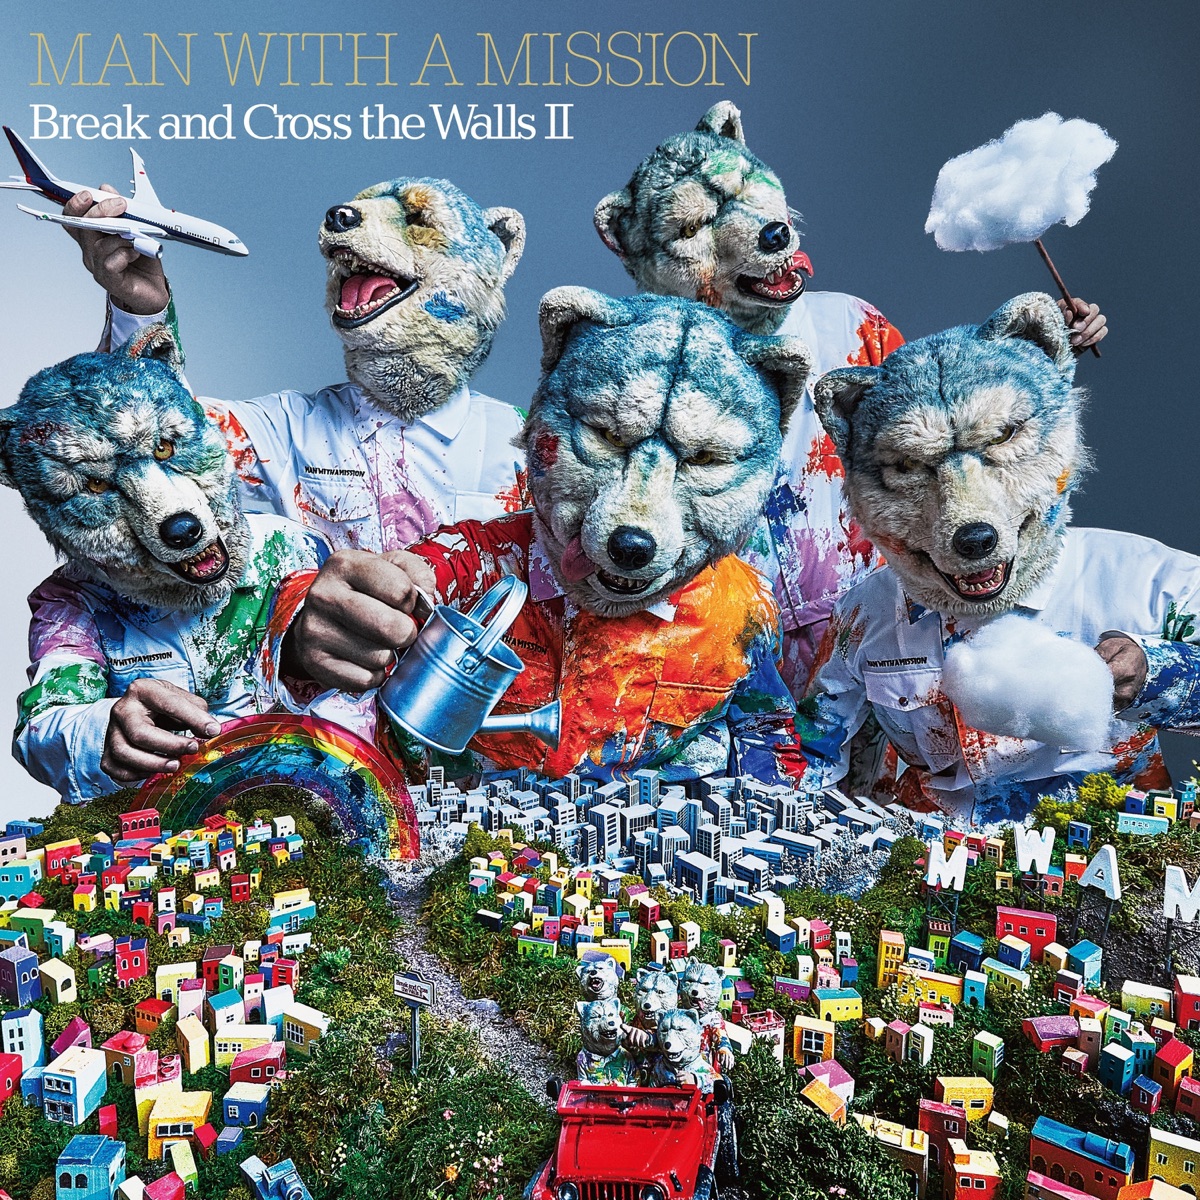 『MAN WITH A MISSION - The Soldiers From The Start』収録の『Break and Cross the Walls Ⅱ』ジャケット